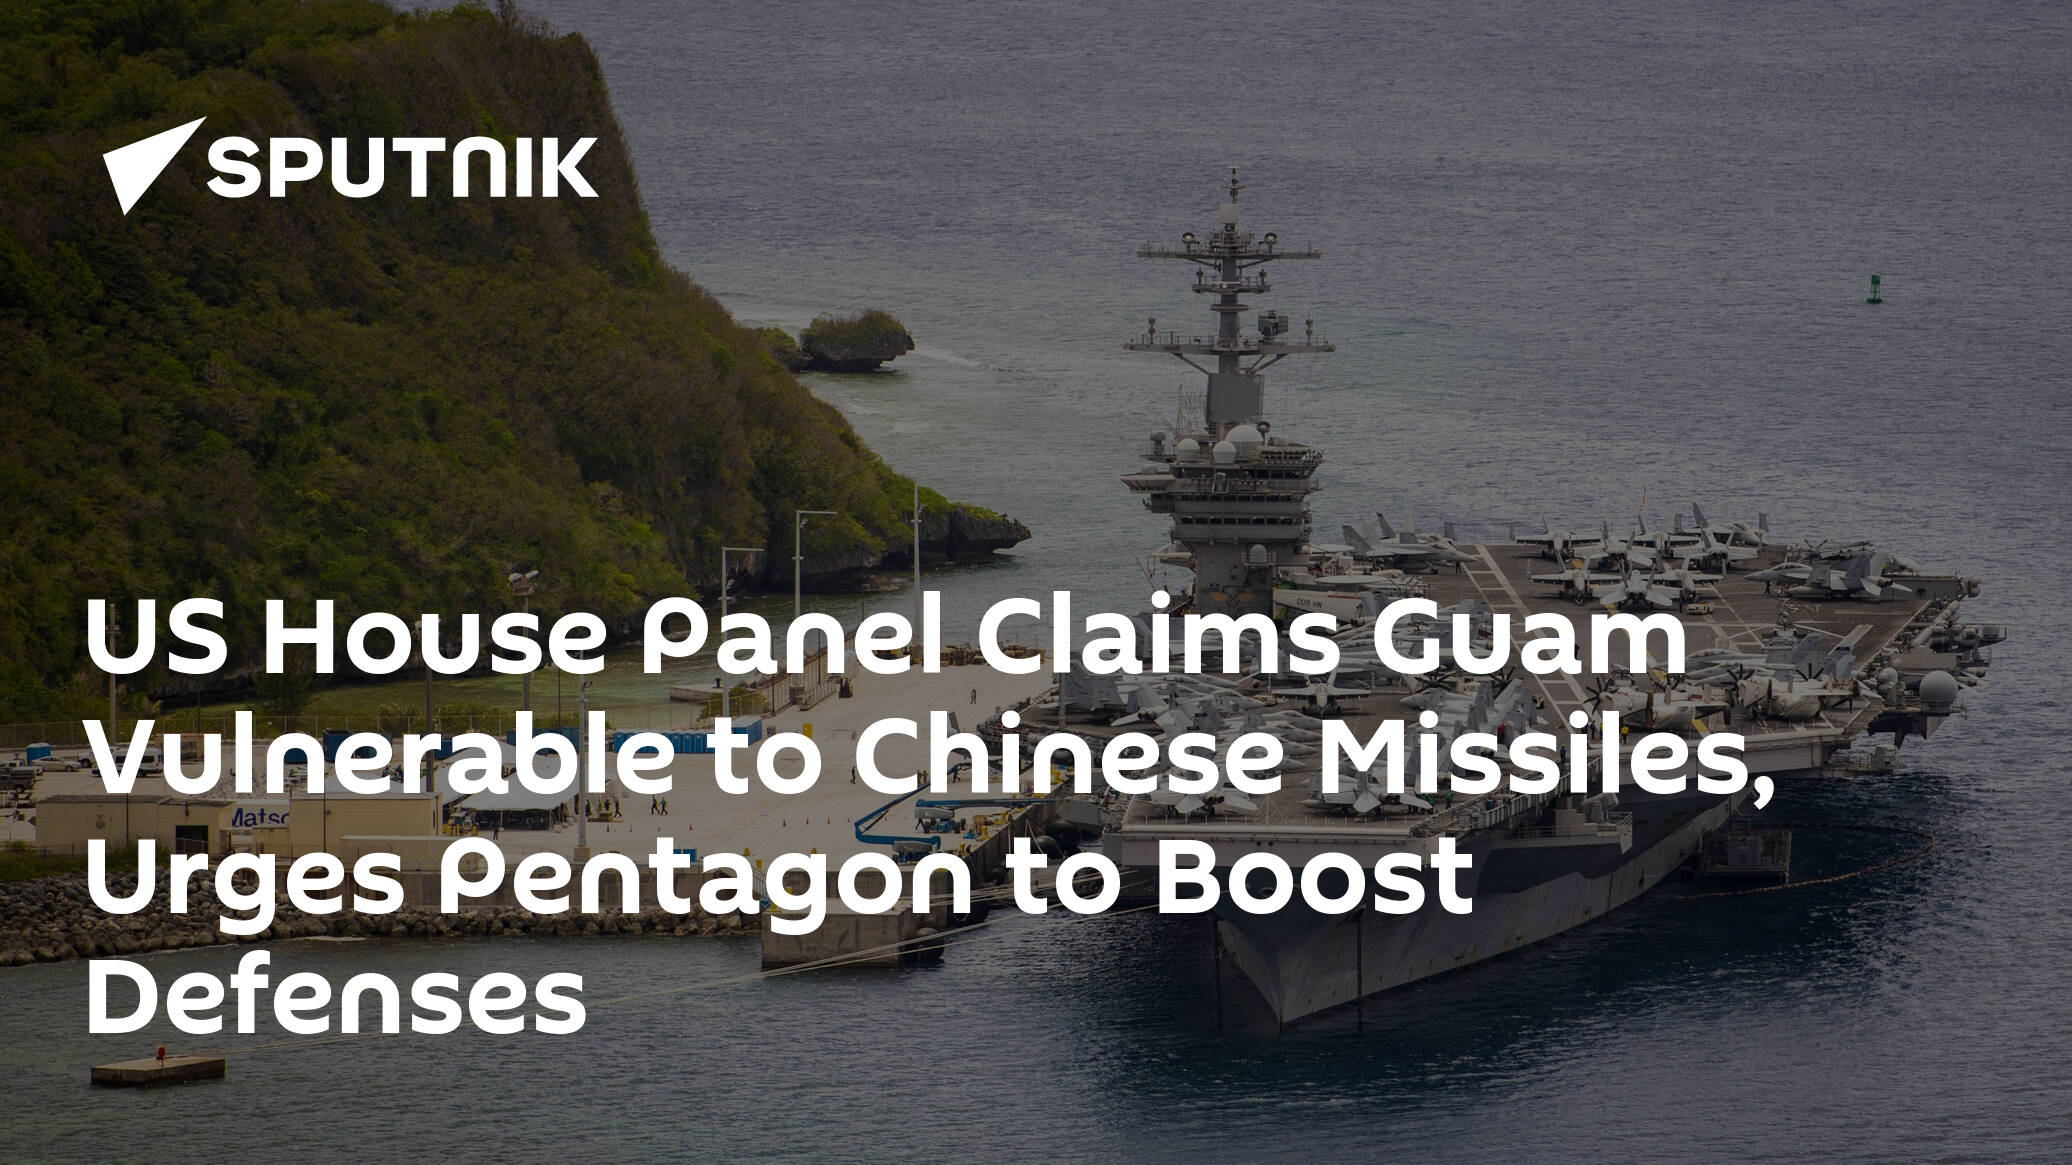 US House Panel Claims Guam Vulnerable to Chinese Missiles, Urges Pentagon to Boost Defenses